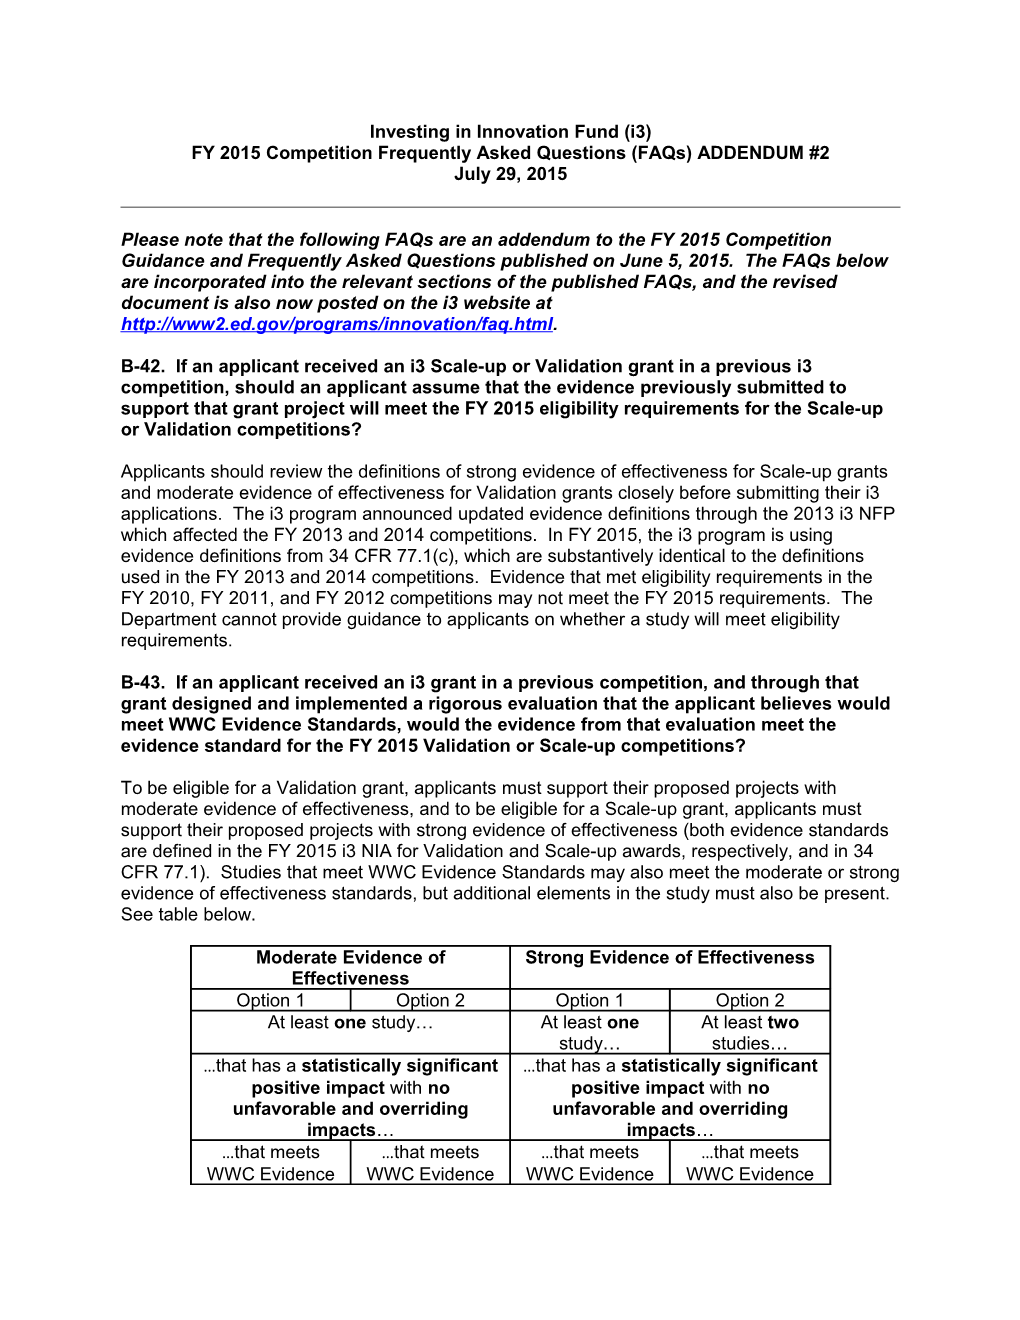 FY 2015 Competition Frequently Asked Questions (Faqs) ADDENDUM #2